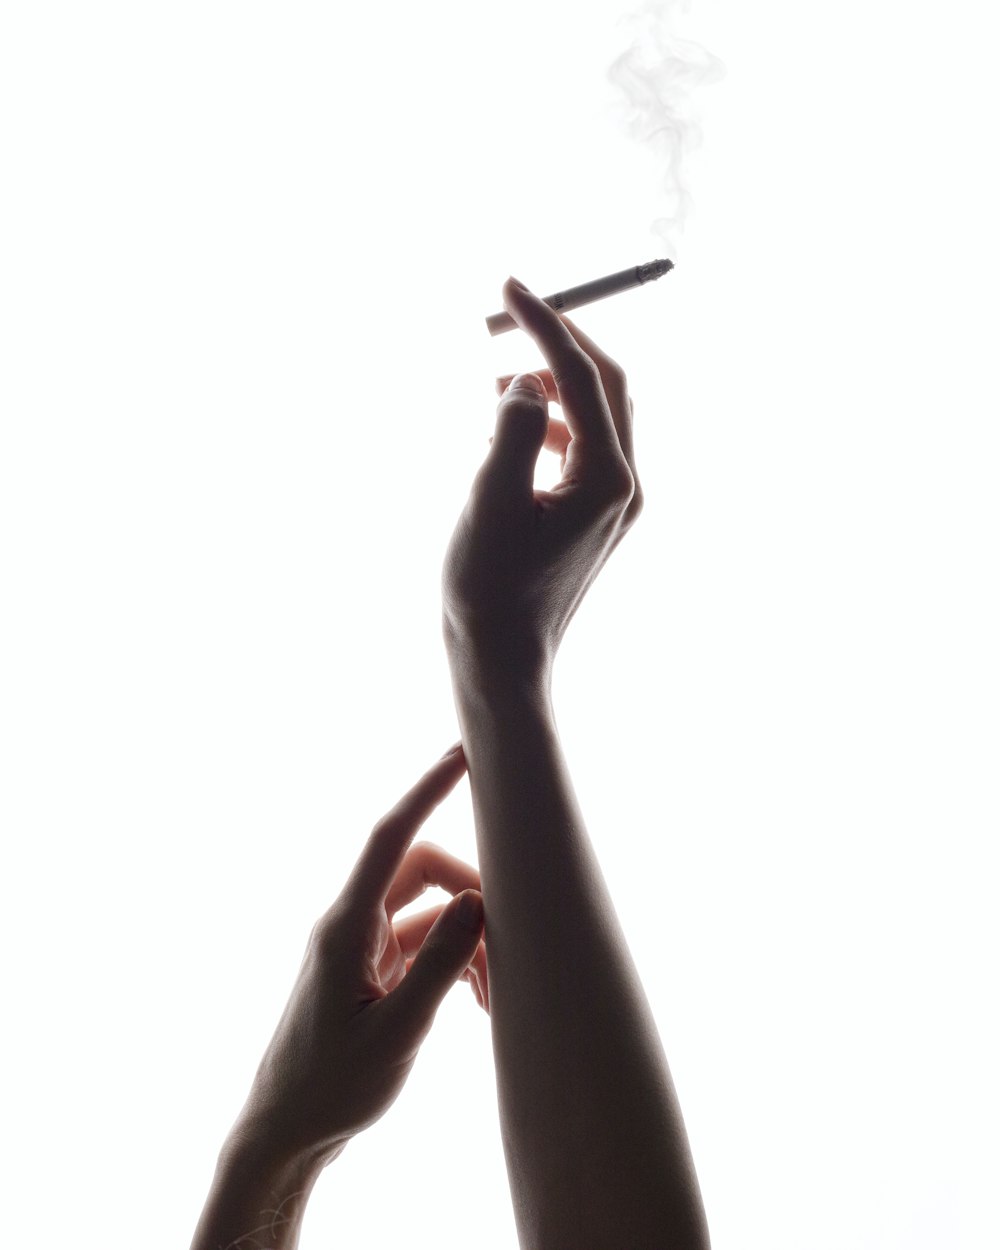 two hands holding a cigarette in front of a white background